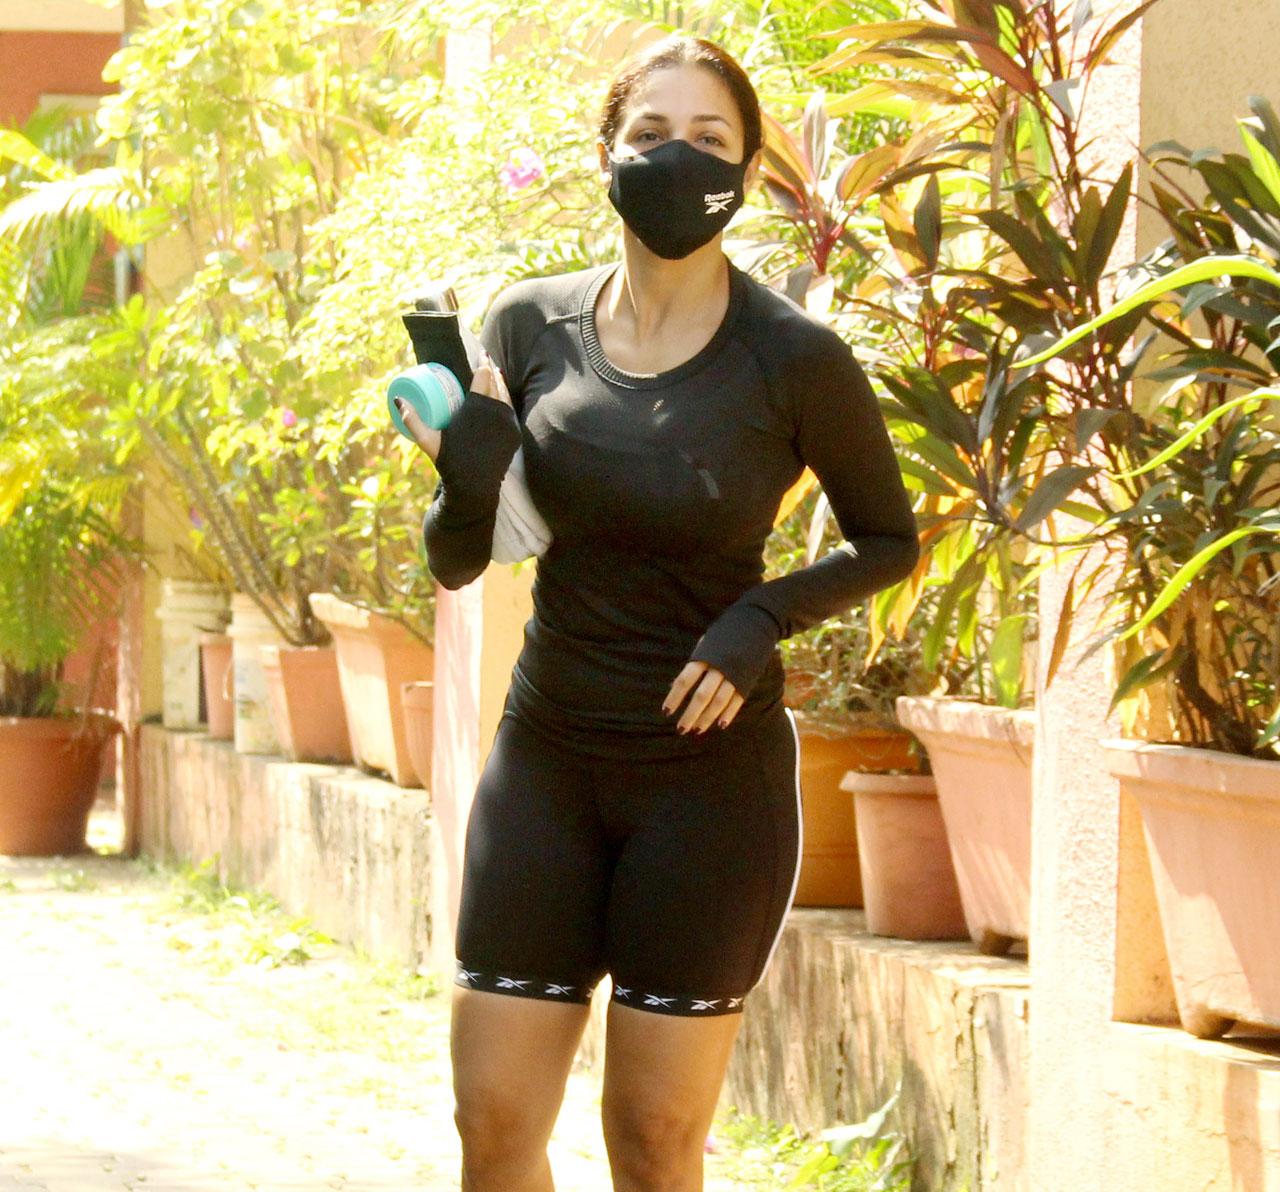 Malaika Arora dressed in all black athleisure attire of tee and gym shorts as she was clicked arriving at her Yoga Studio in Bandra. Abiding by COVID-19 restrictions, the fitness diva wore a matching face mask.